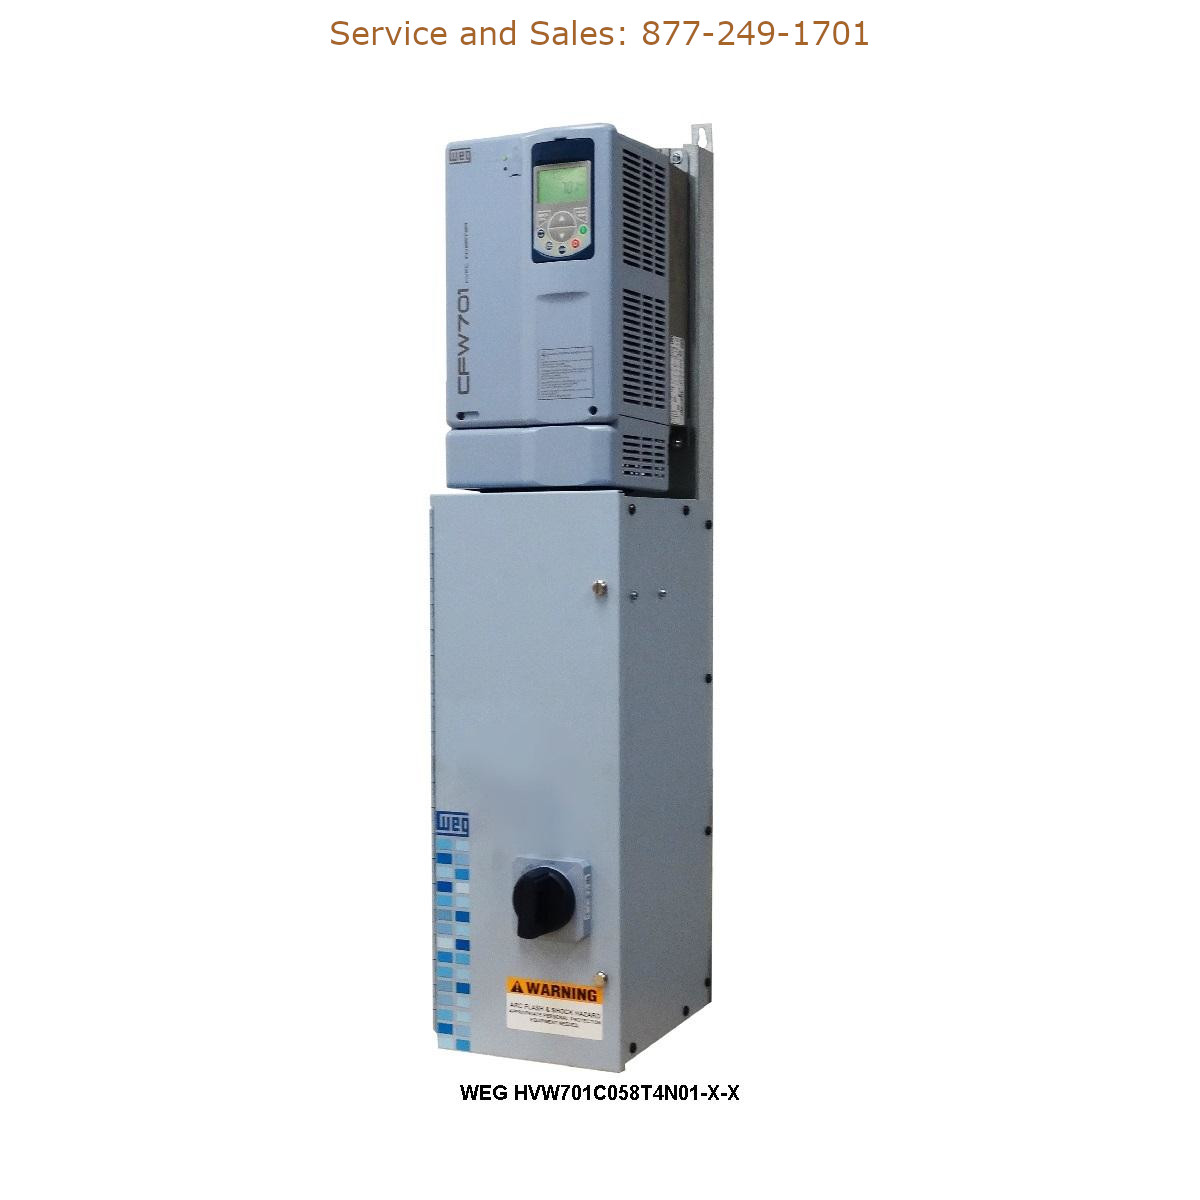 WEG HVW701C058T4N01-X-X WEG Model Number HVW701C058T4N01-X-X WEG Drives, Variable Speed Drives Repair Service, Troubleshooting, Replacement Parts https://gesrepair.com/wp-content/uploads/2022/WEG/WEG_HVW701C058T4N01-X-X_Drives_Variable_Speed_Drives.jpg